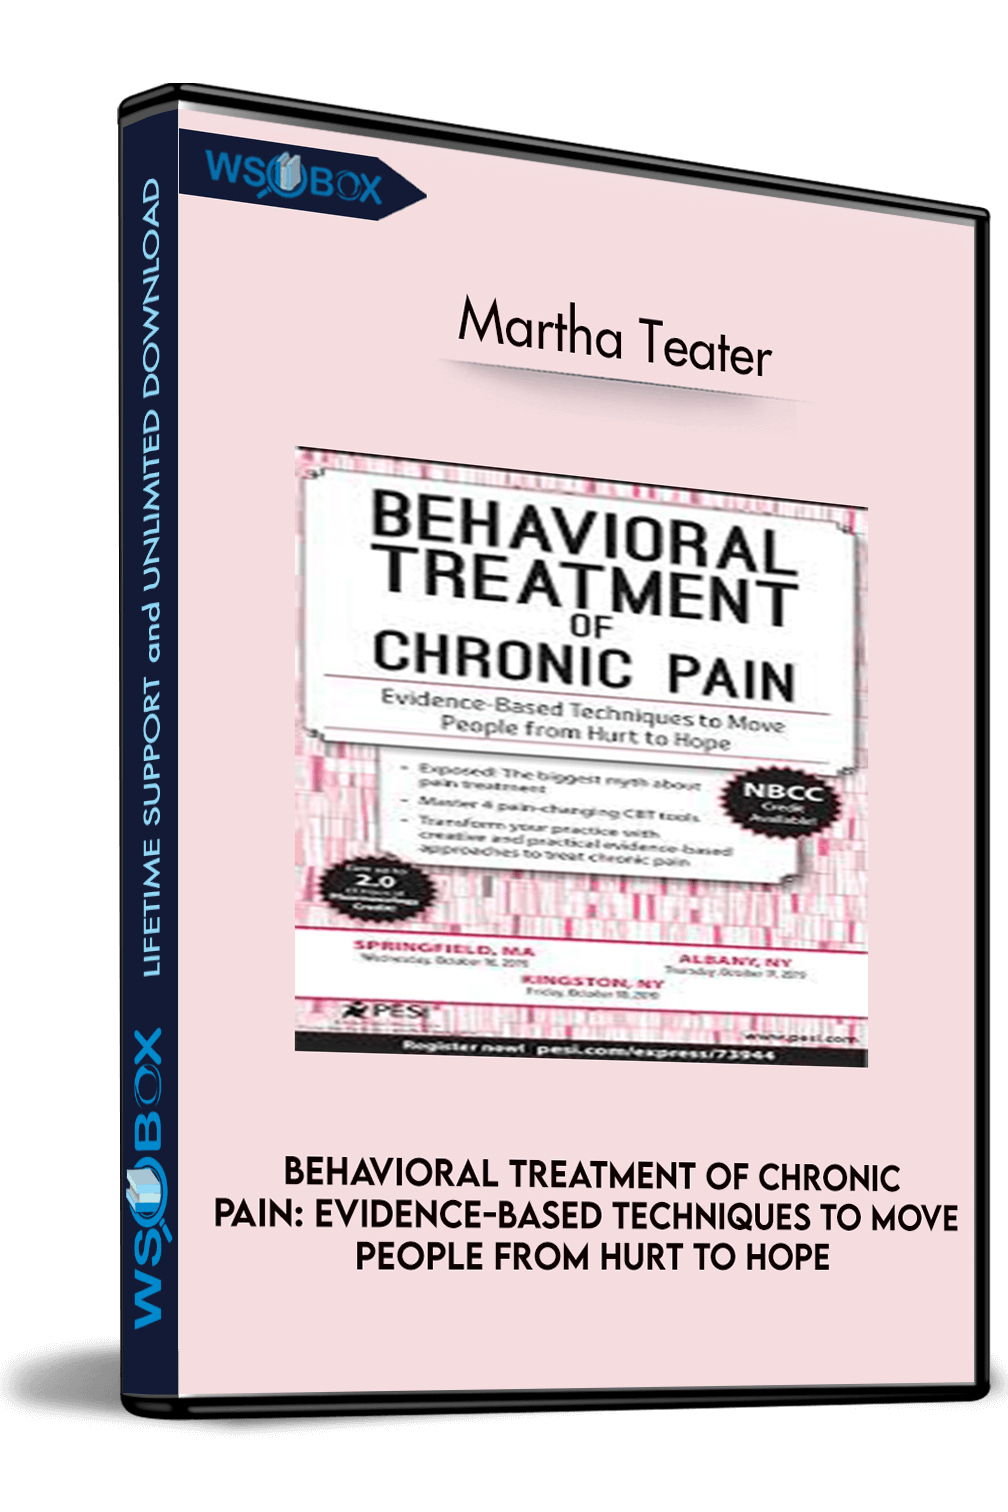 Behavioral Treatment of Chronic Pain: Evidence-Based Techniques to Move People from Hurt to Hope – Martha Teater